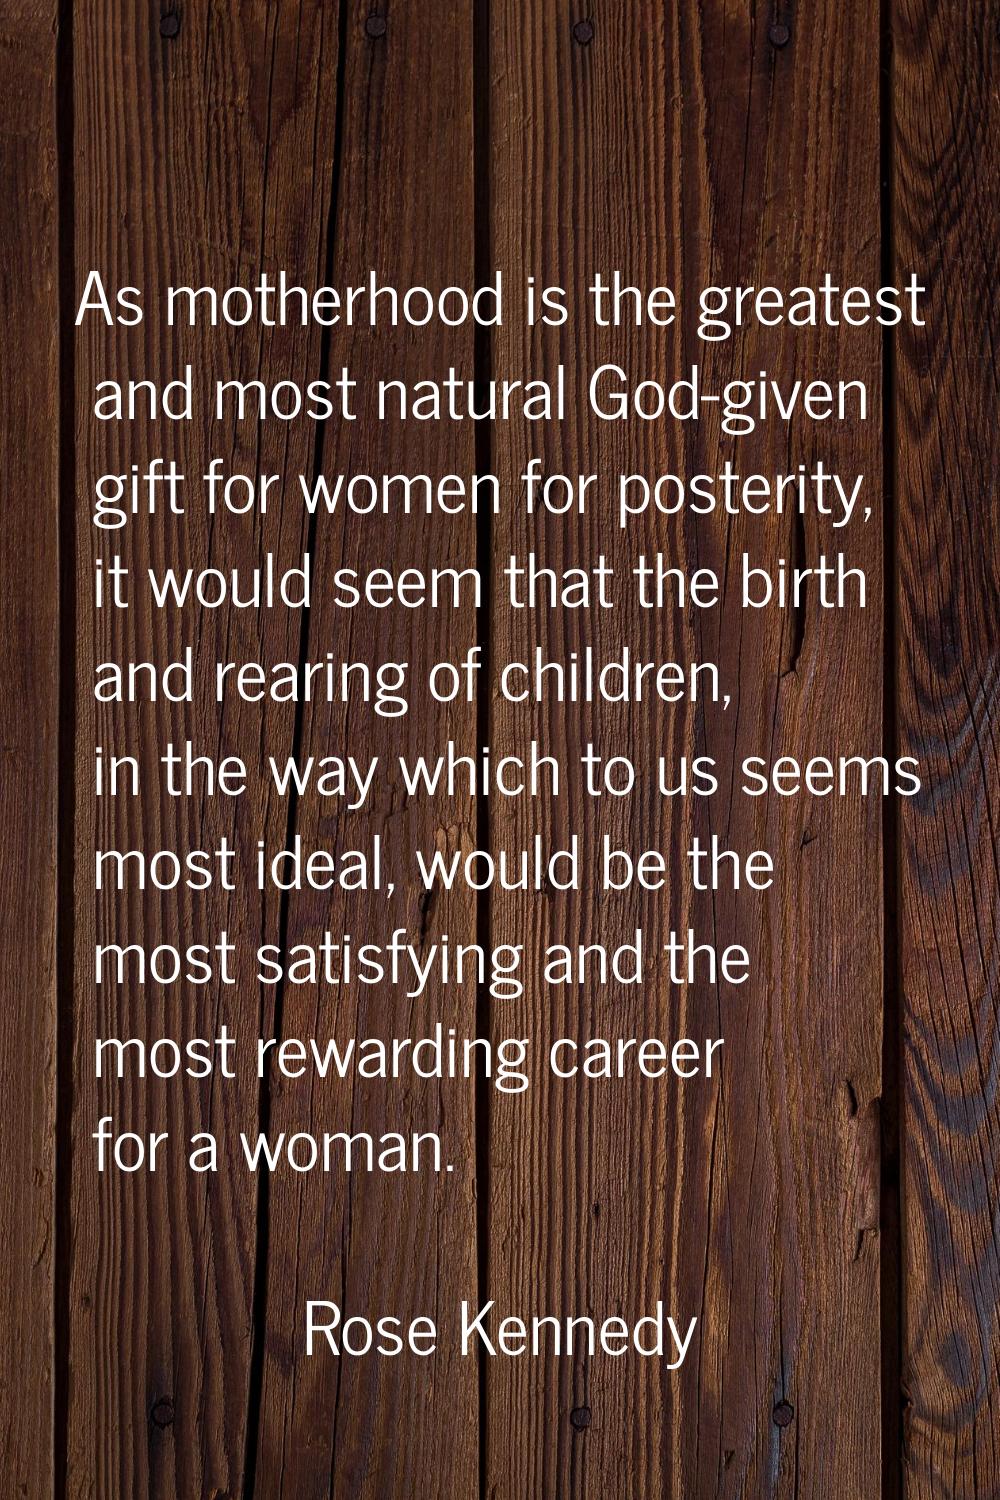 As motherhood is the greatest and most natural God-given gift for women for posterity, it would see